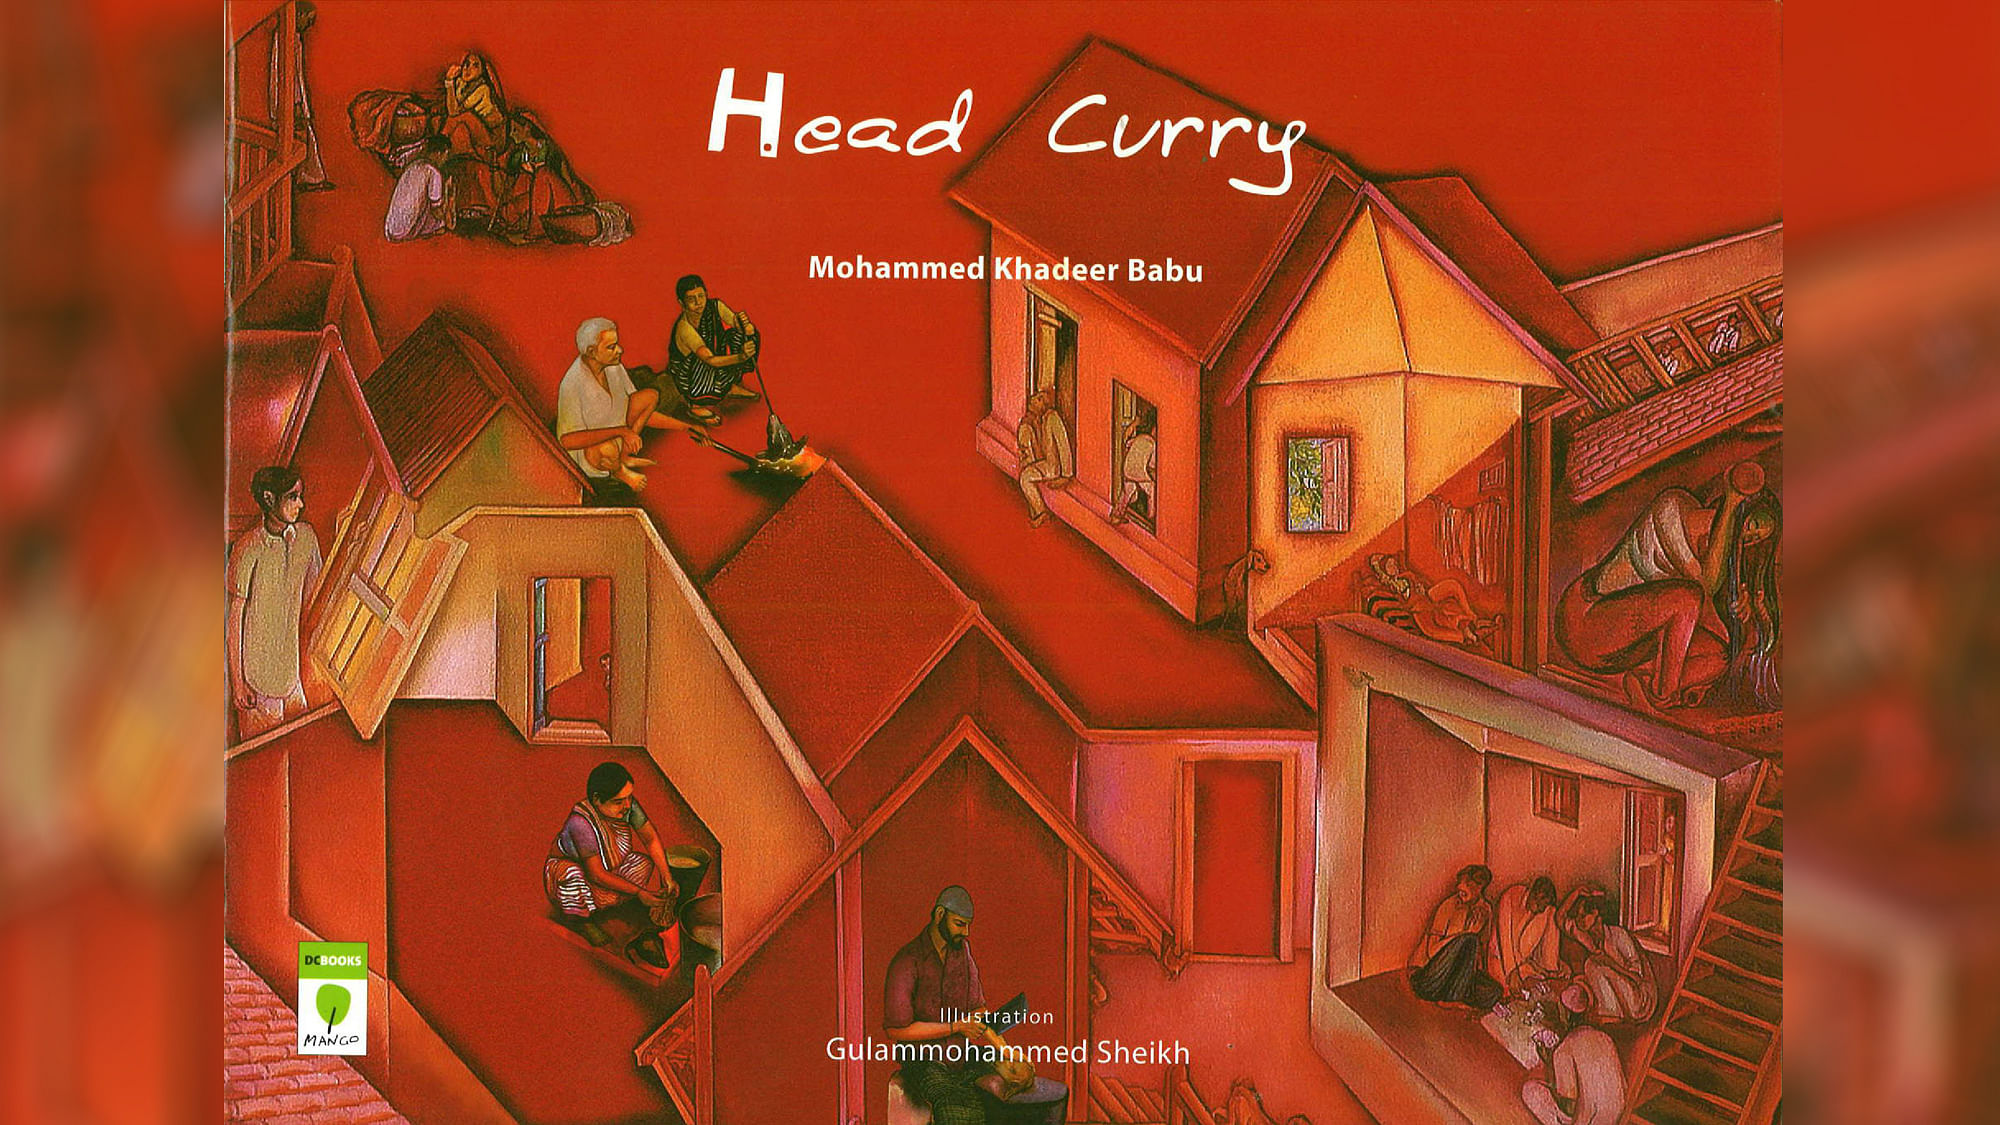 <i>

Head Curry</i> is part of Different Tales – a project involving stories from the lives of children who rarely find place in mainstream children’s literature. (Photo: <a href="http://www.mangobooks.net/">Mango Books</a>)